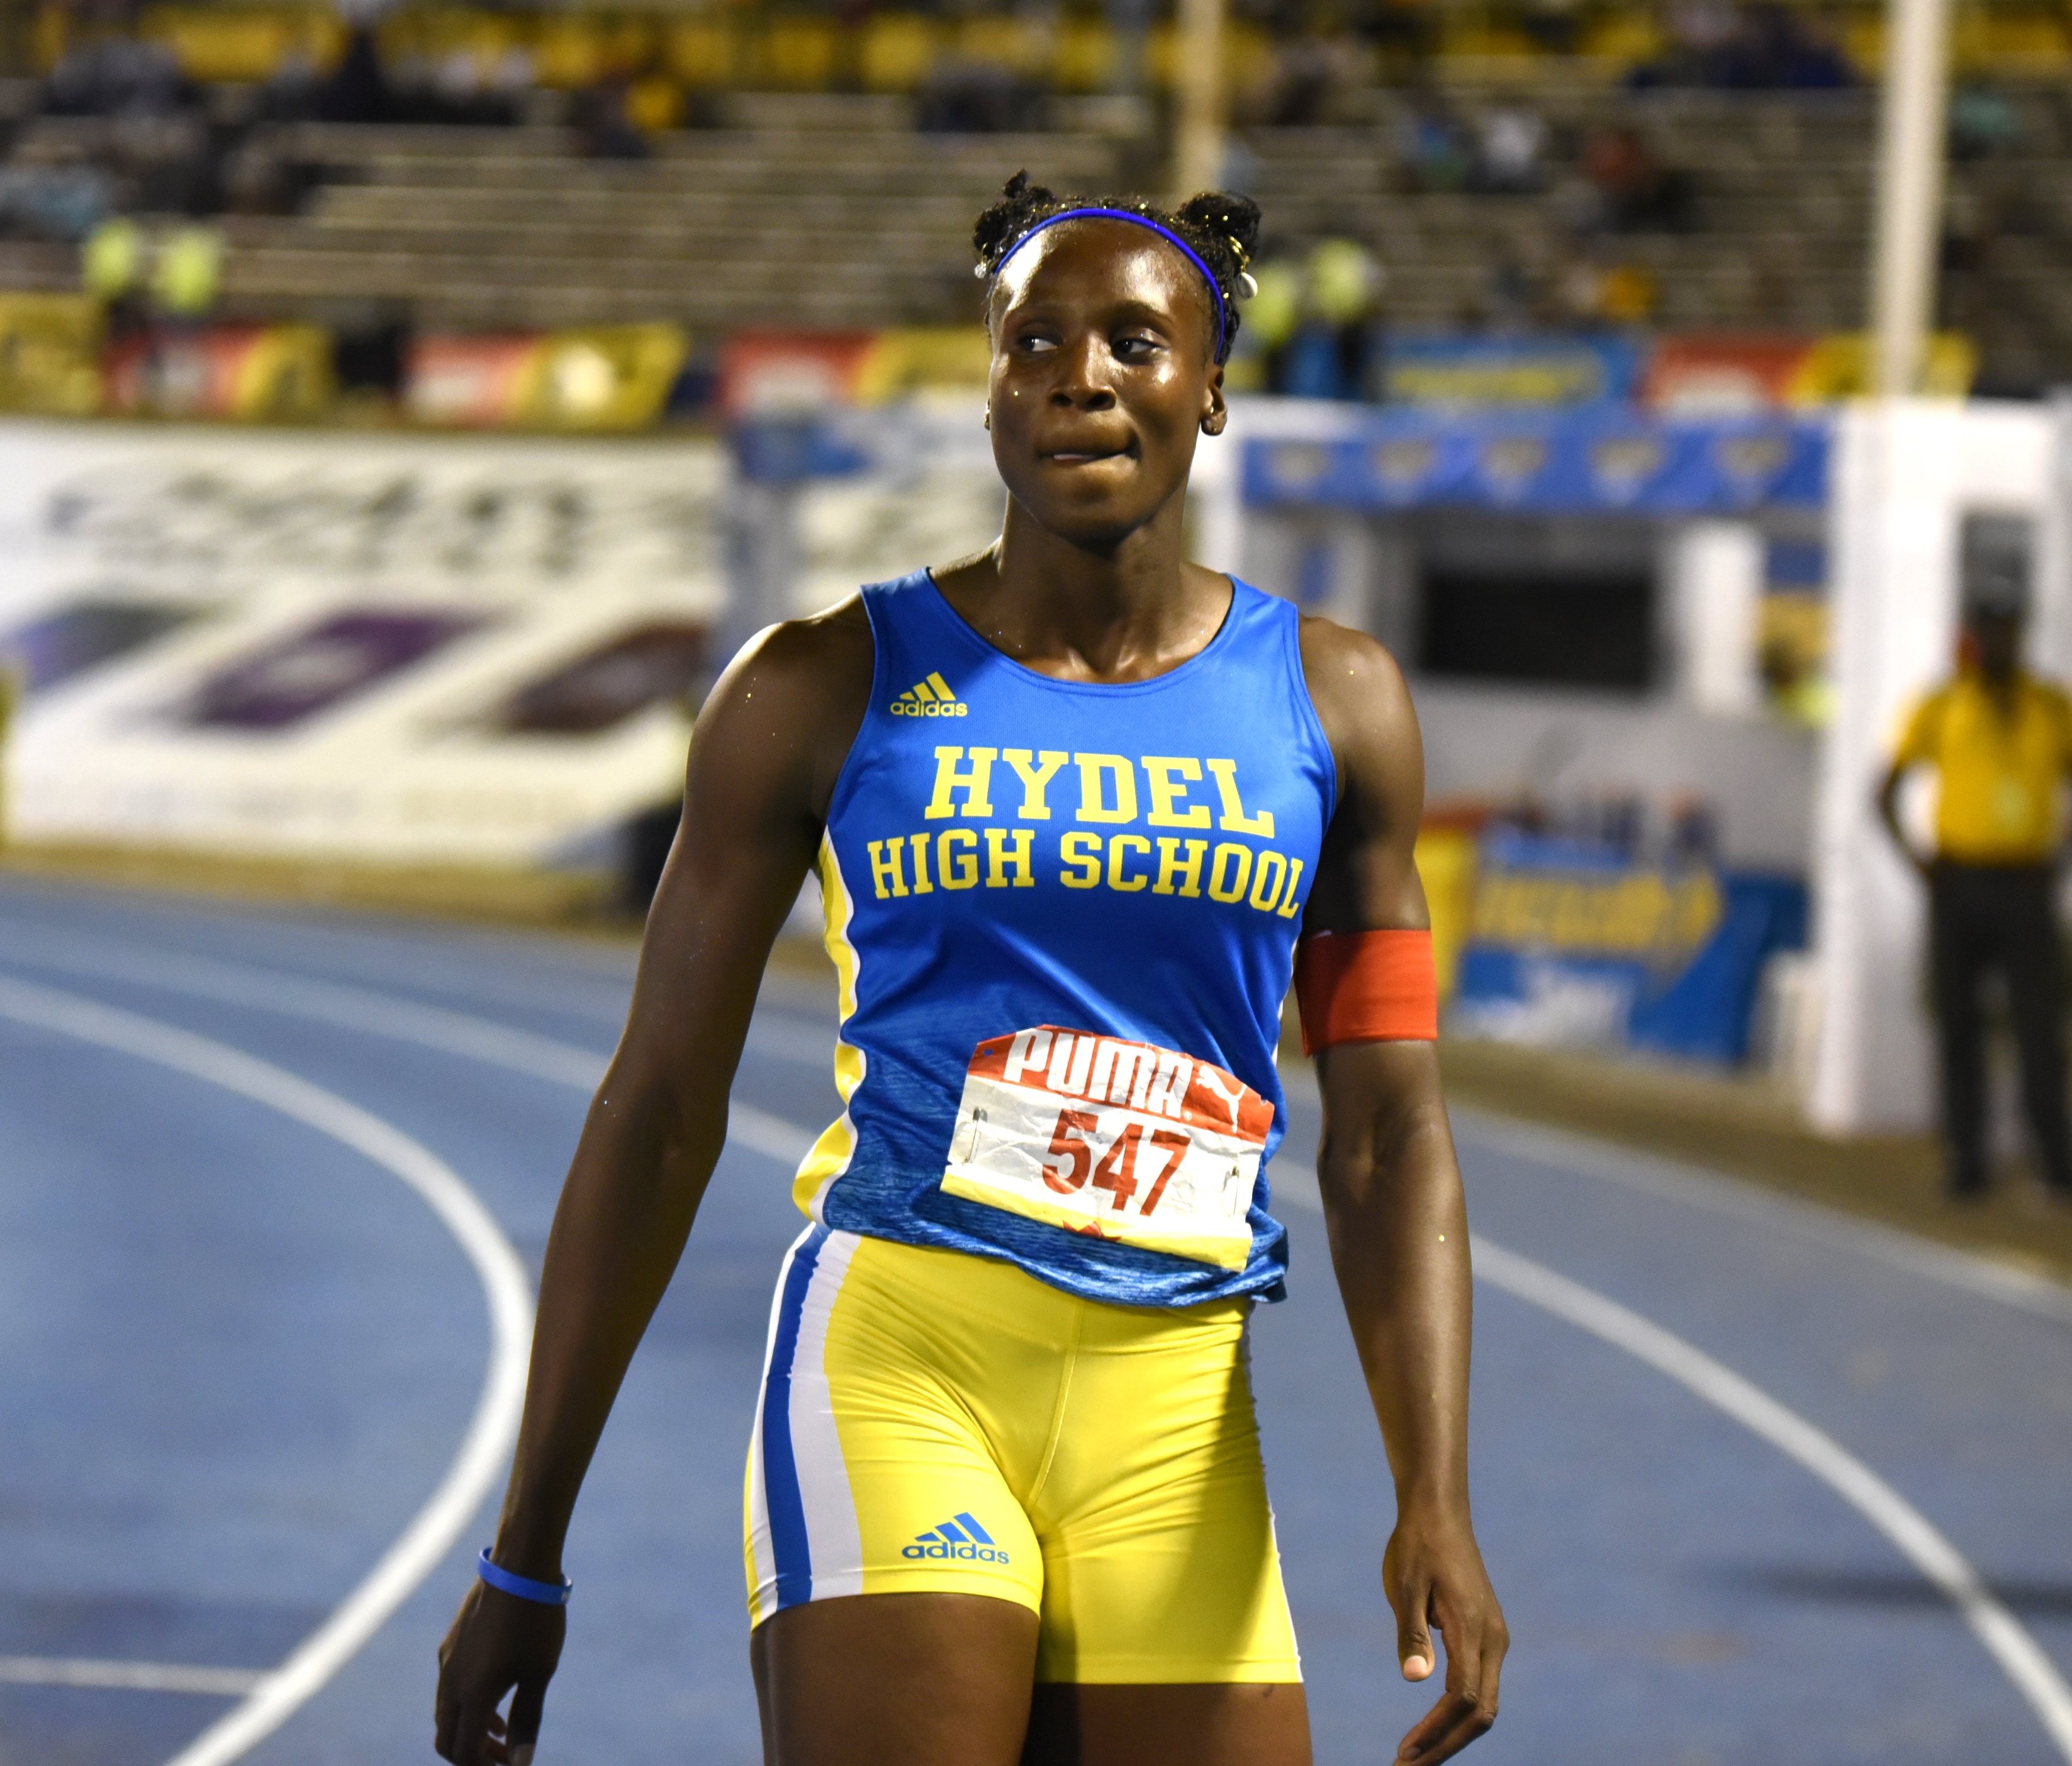 Davis cruises into 200m final; Moore no-show at Central Champs